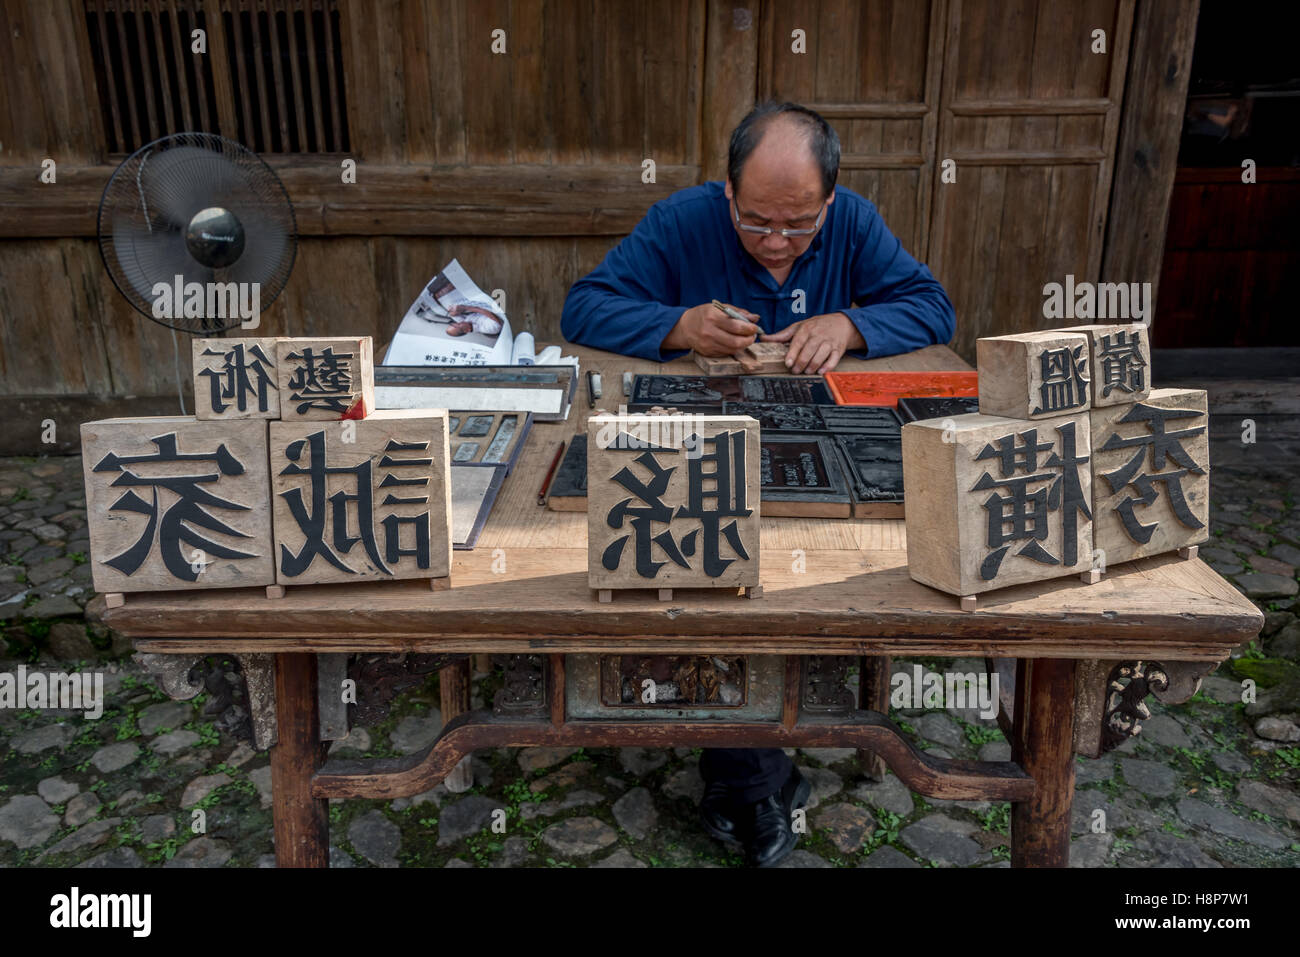 A master trained in the art  of Chinese movable type printing carves wooden characters at Dongyuan village, Ruian, China. Stock Photo